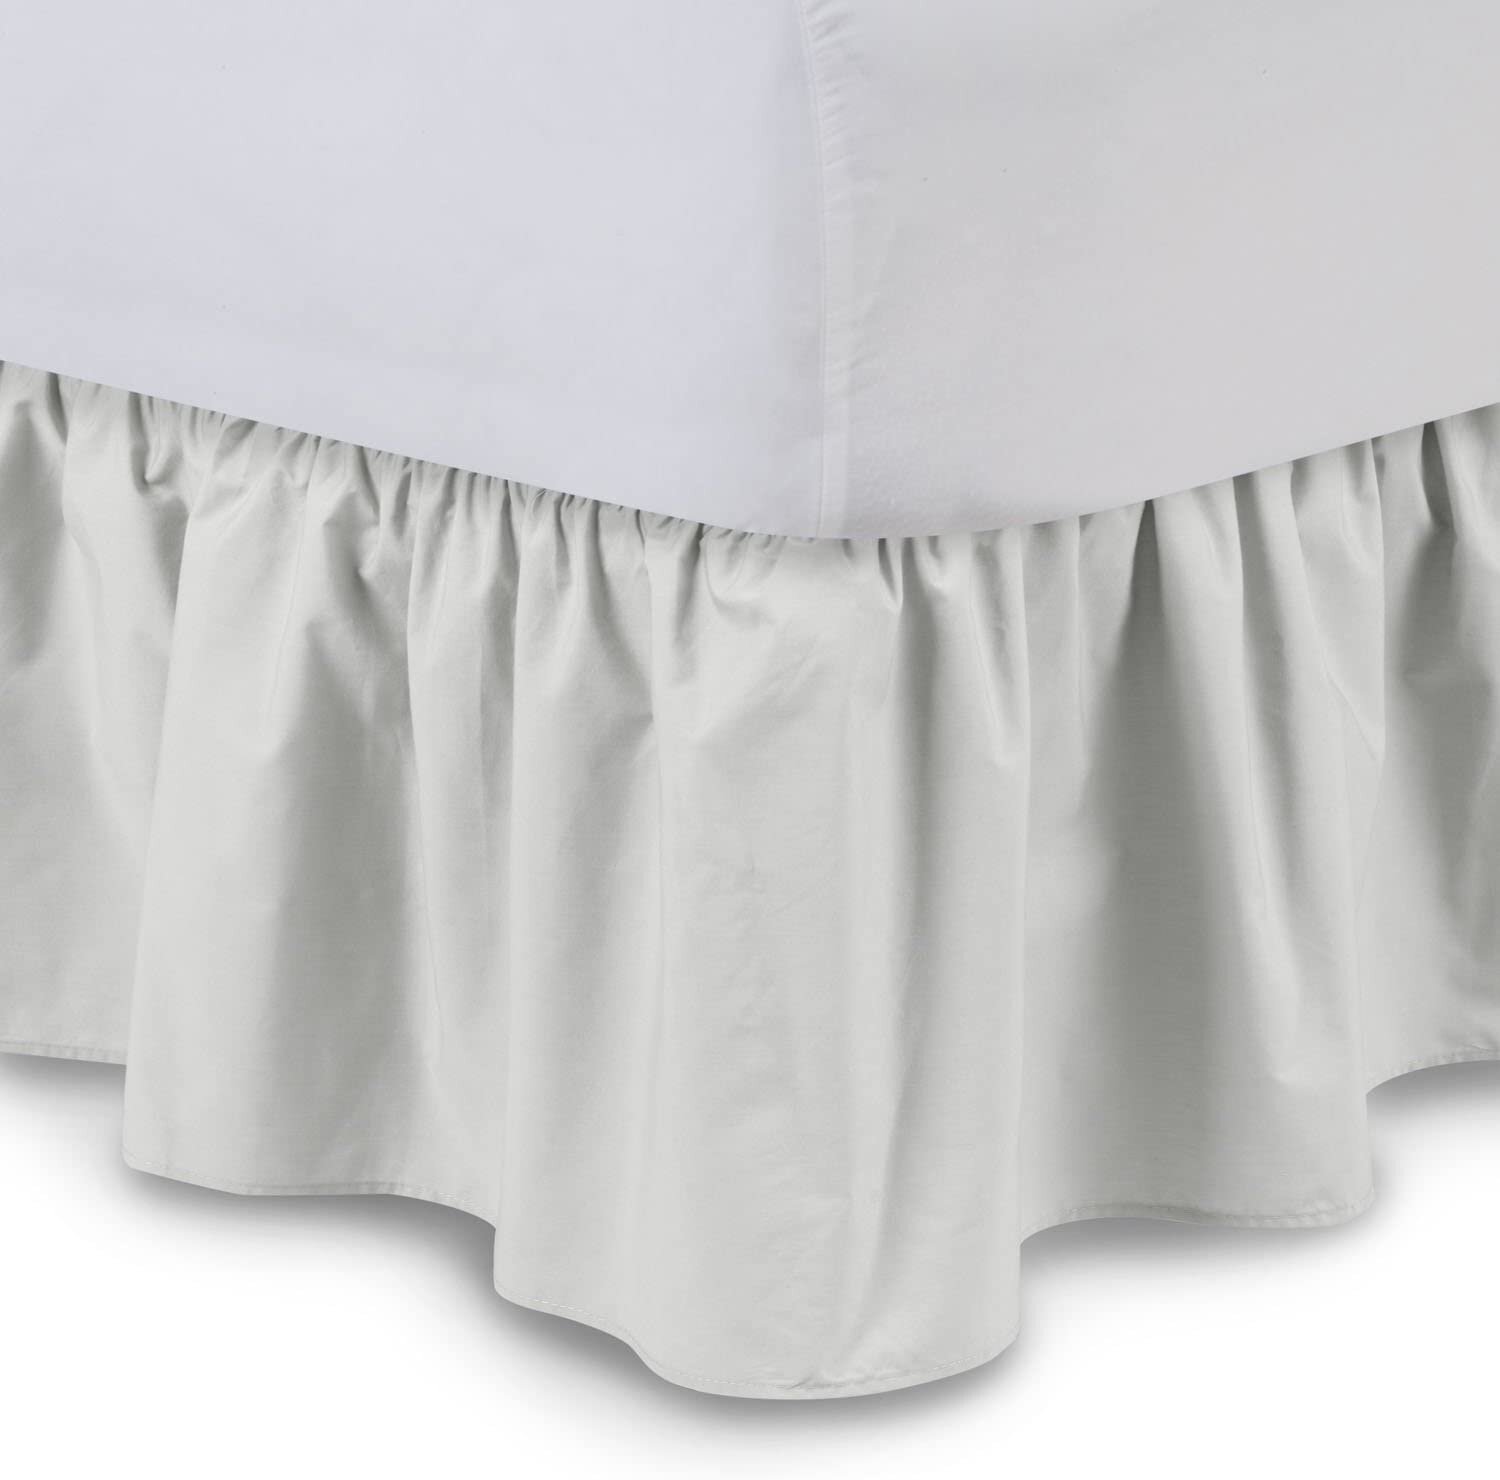 NEWEEN Wrap Around Bed Skirts for Queen Beds 15 Inches Drop, White Elastic  Dust Ruffles Easy Fit Wrinkle & Fade Resistant Silky Luxurious Fabric Solid